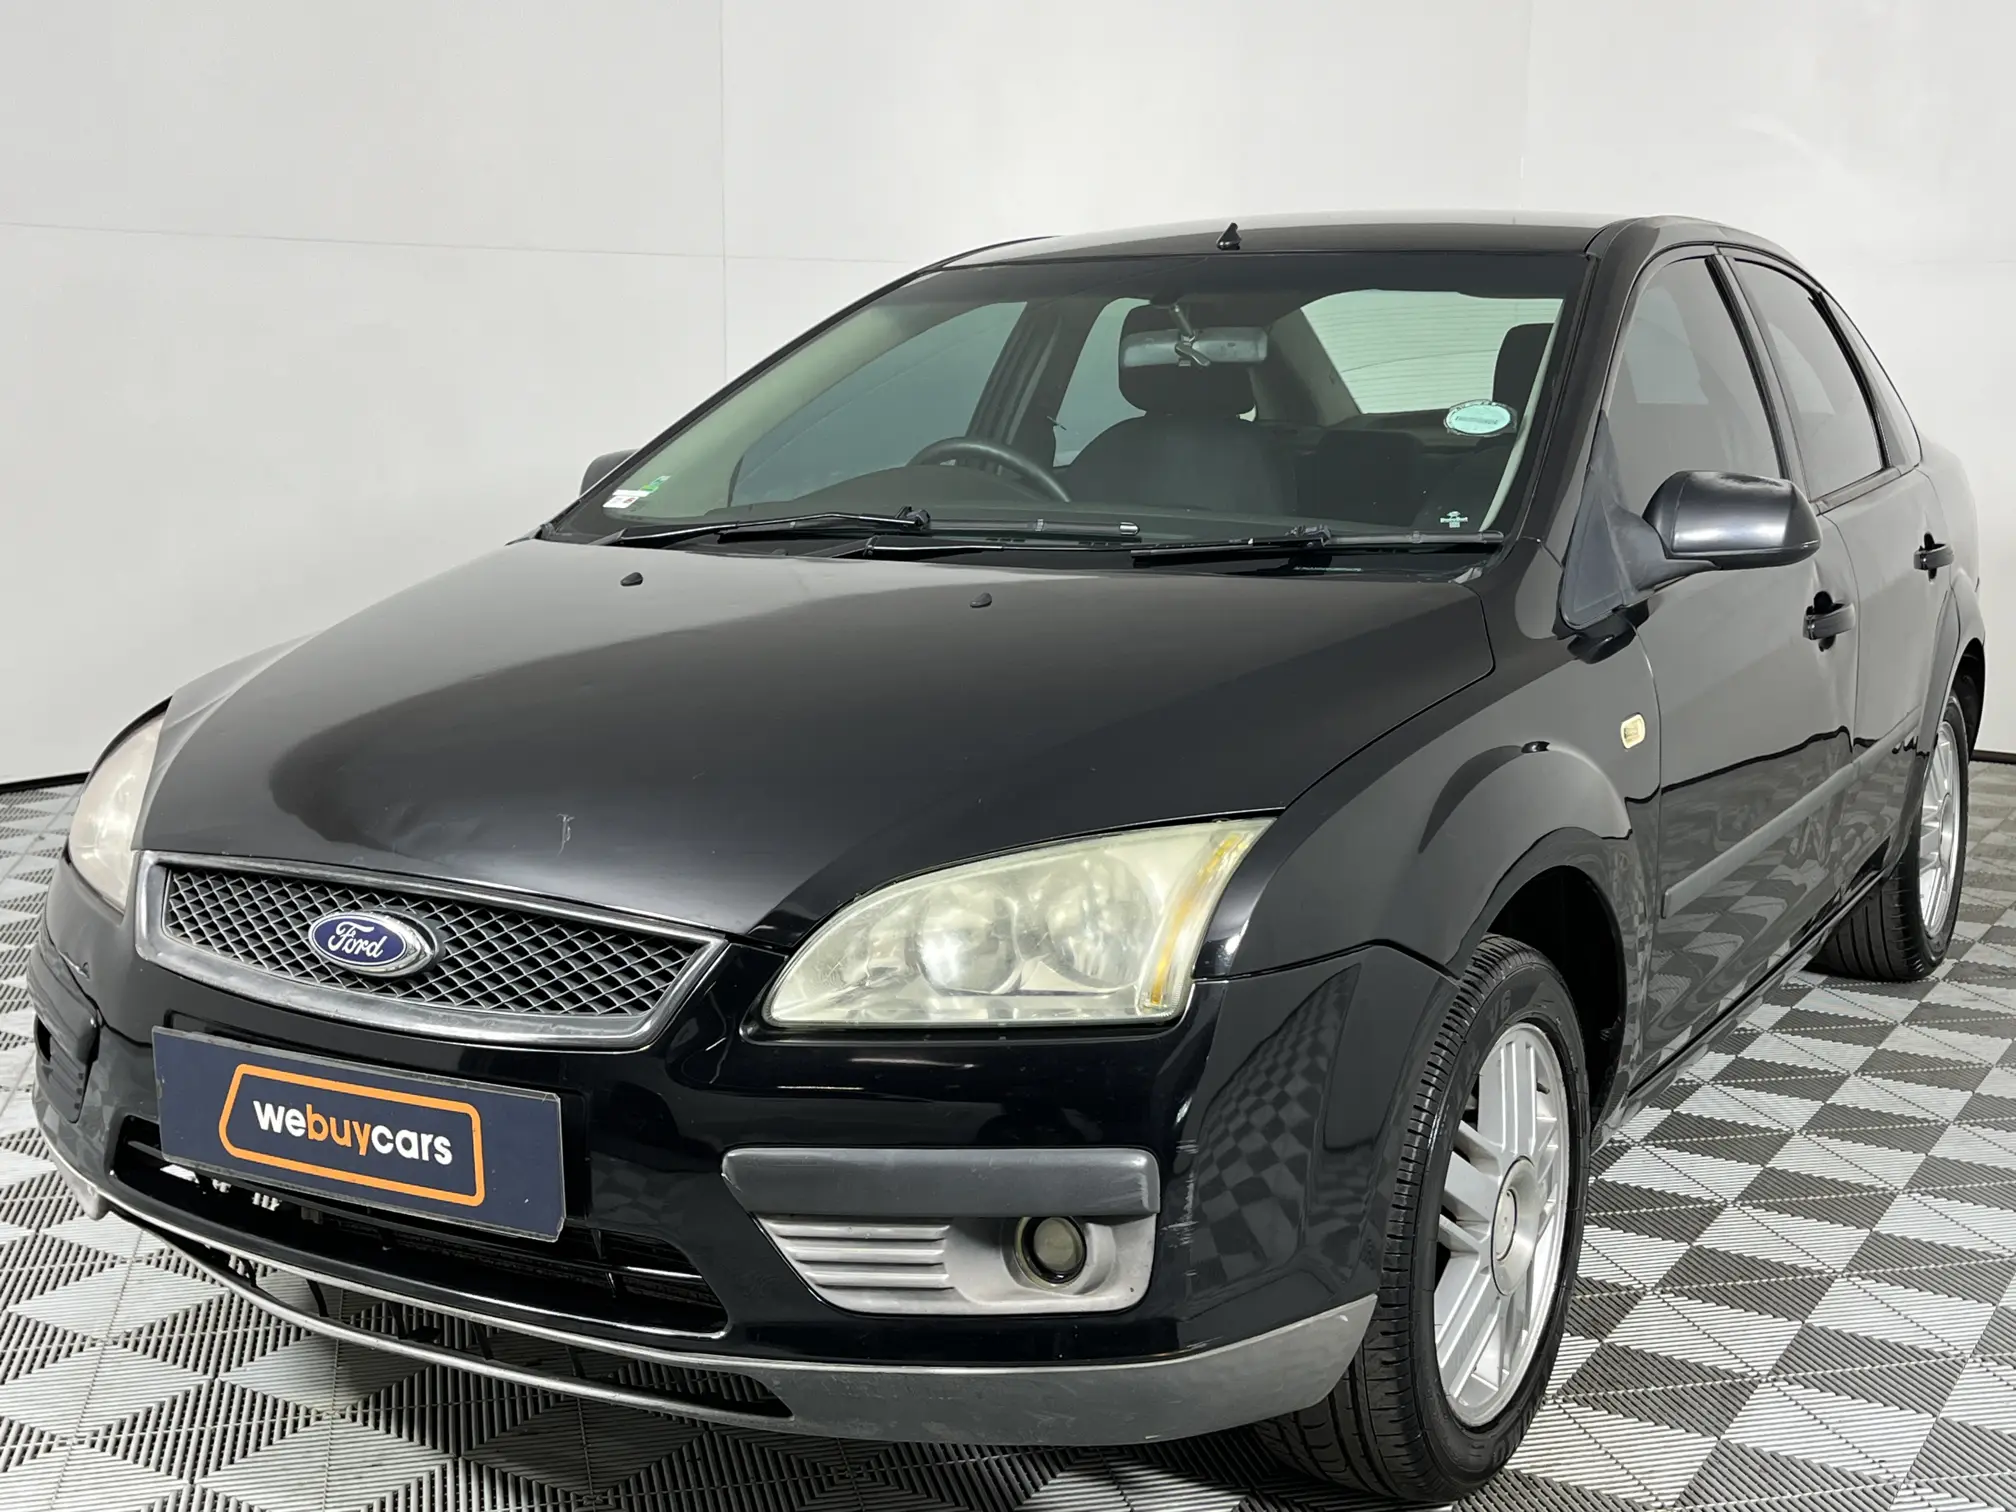 2006 Ford Focus 2.0 Trend